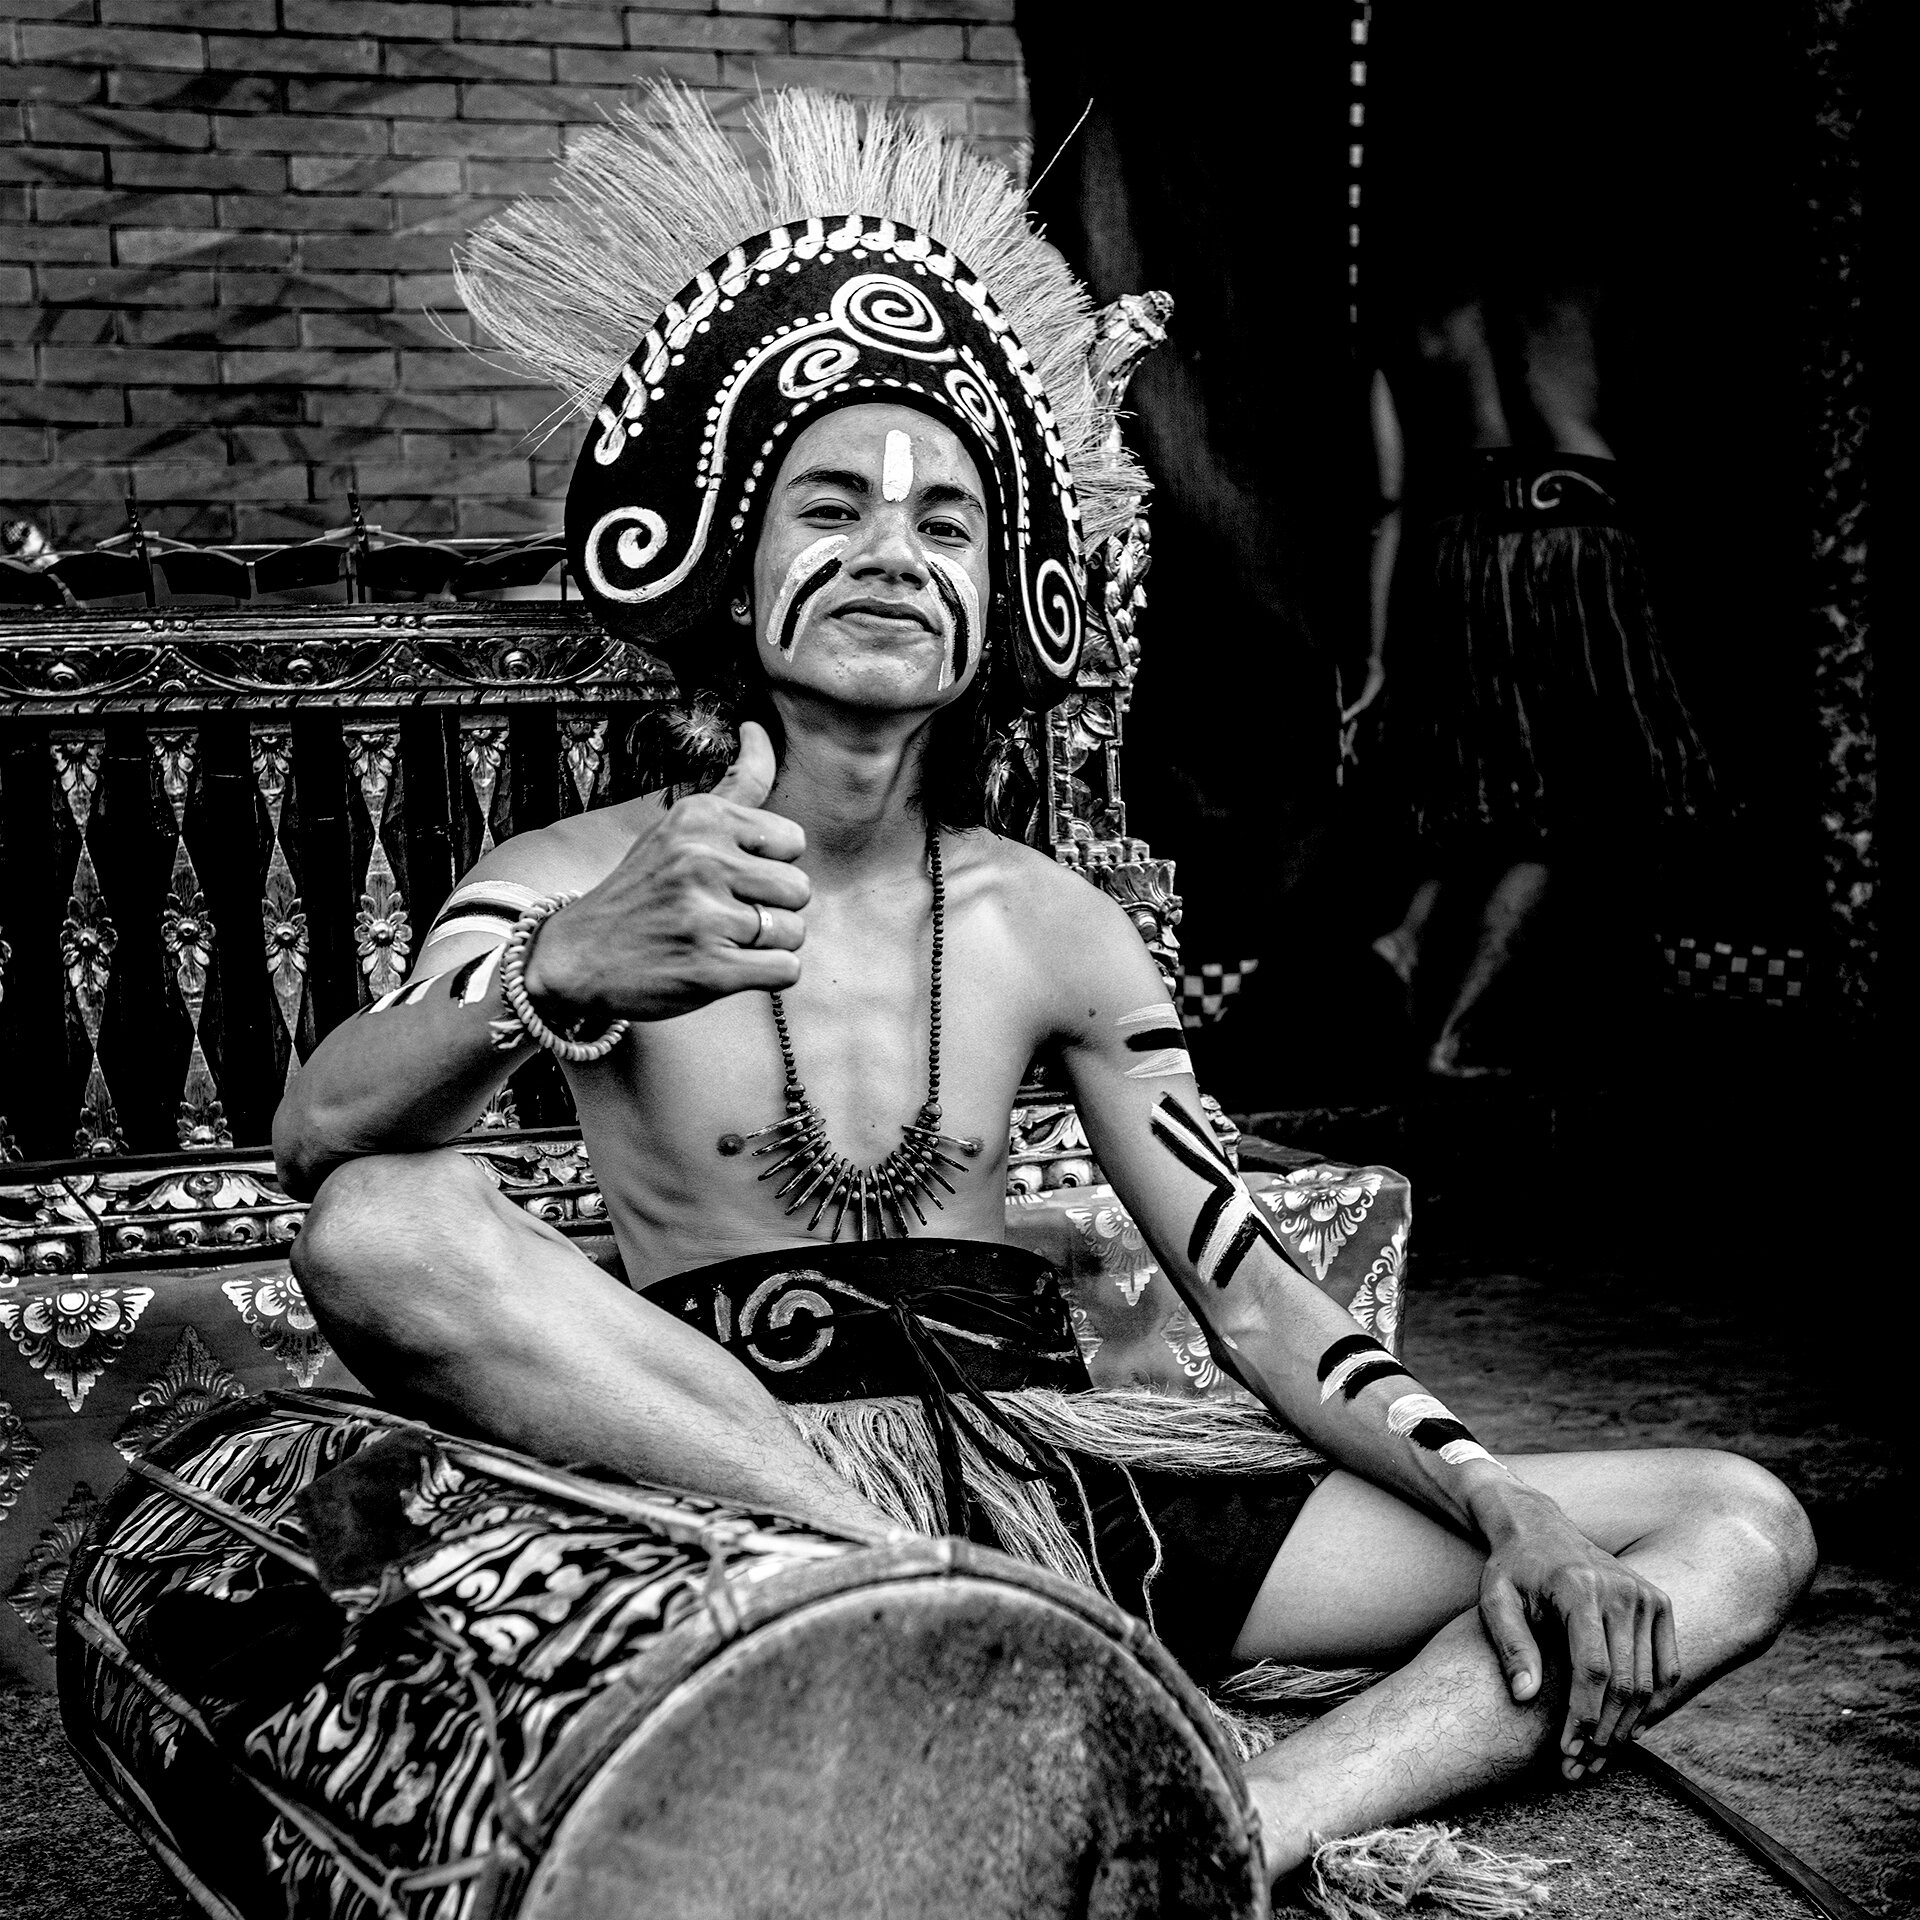 Traditional Drummer - Bali, Indonesia